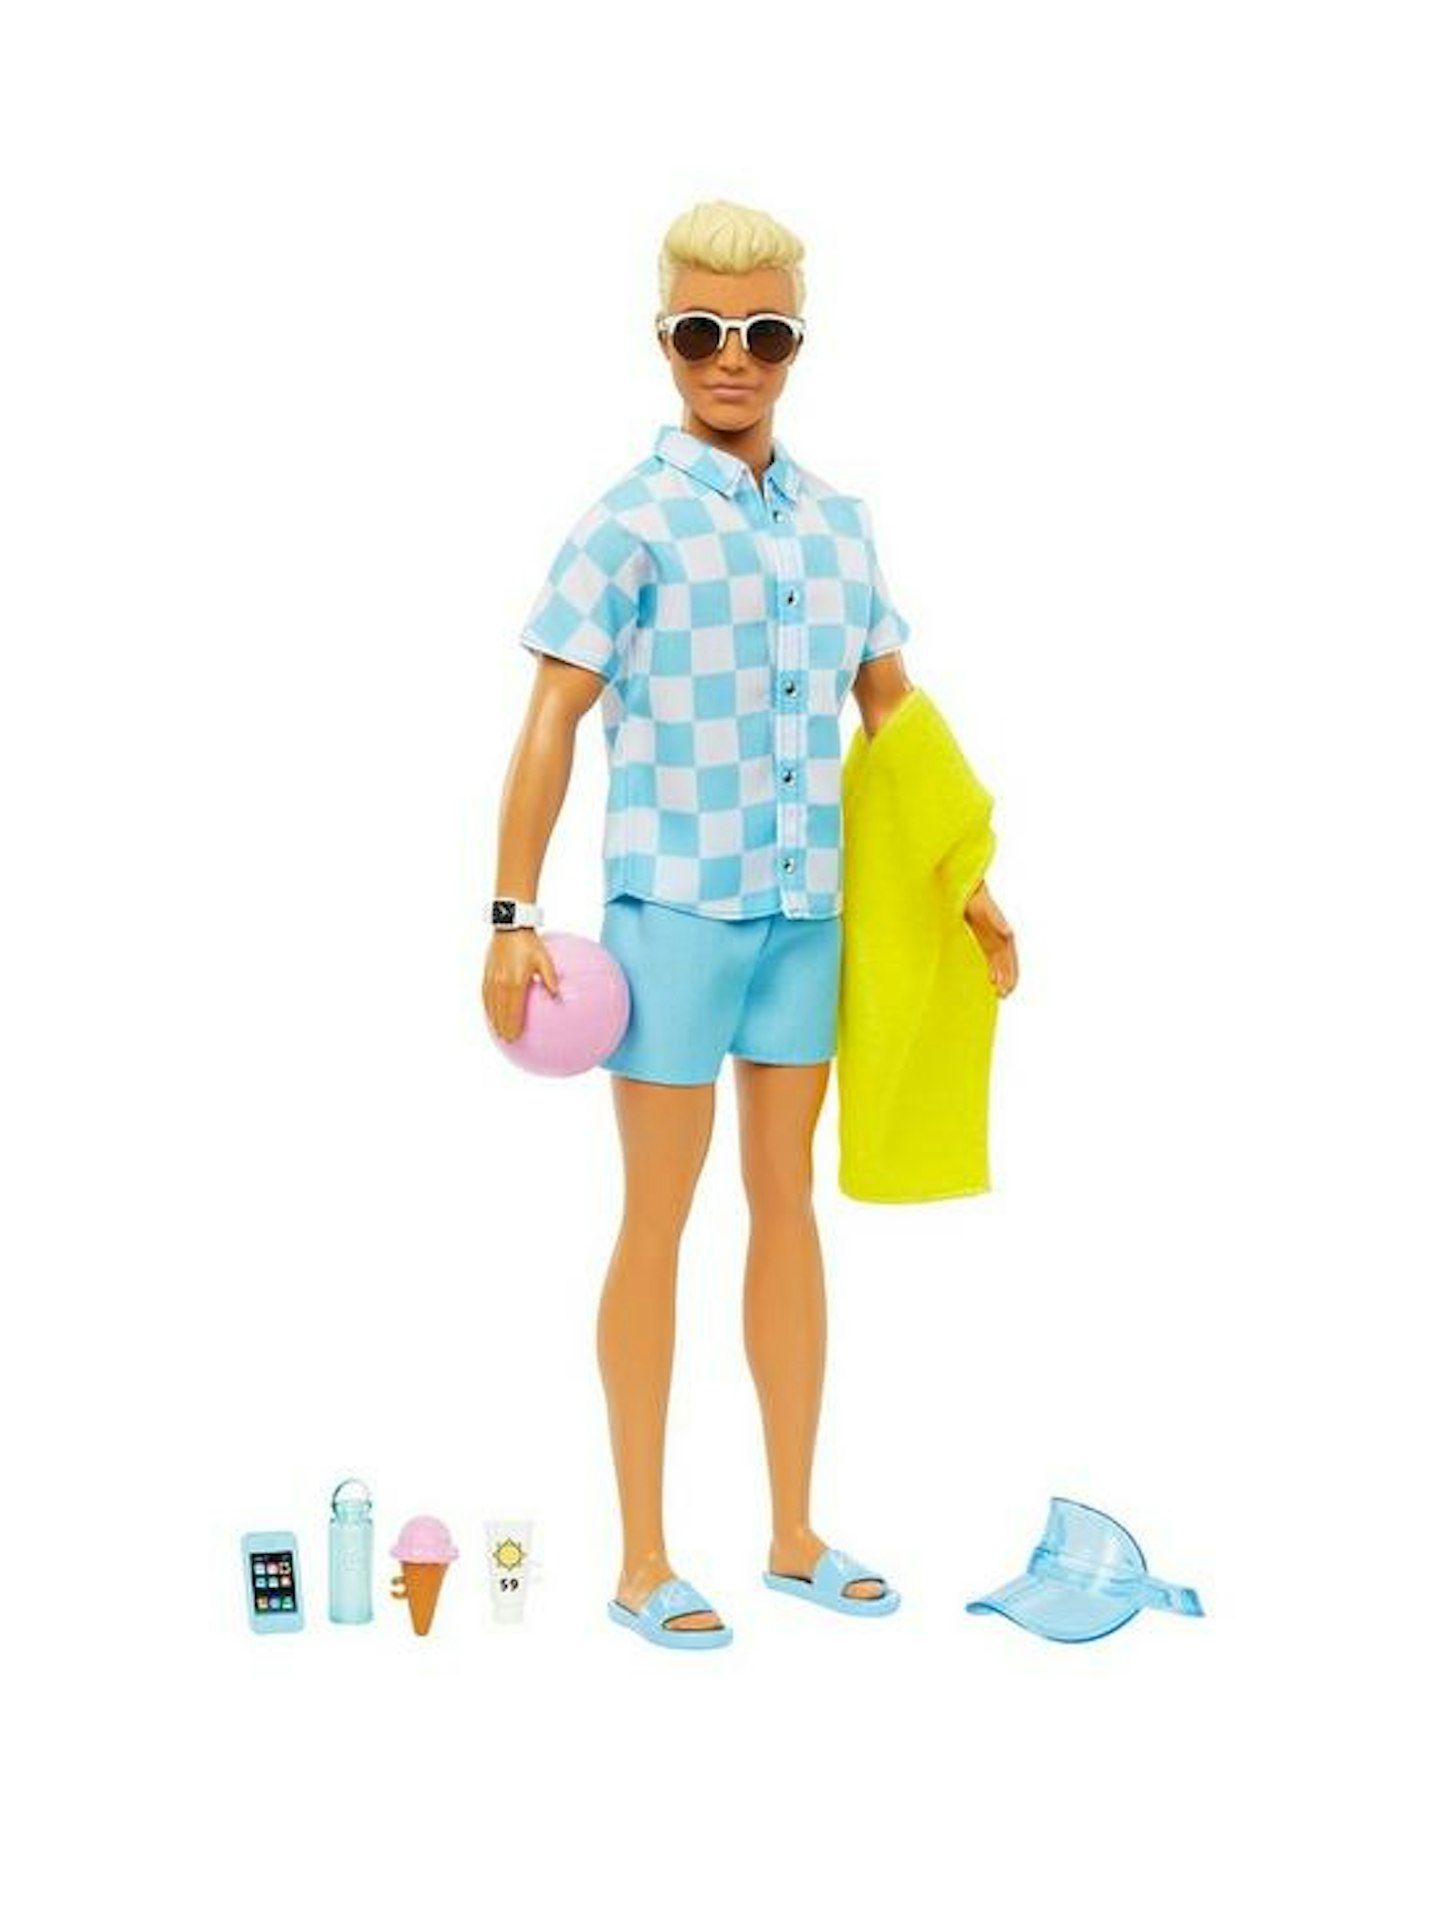 Barbie Blonde Ken Doll with Swim Trunks and Beach Accessories